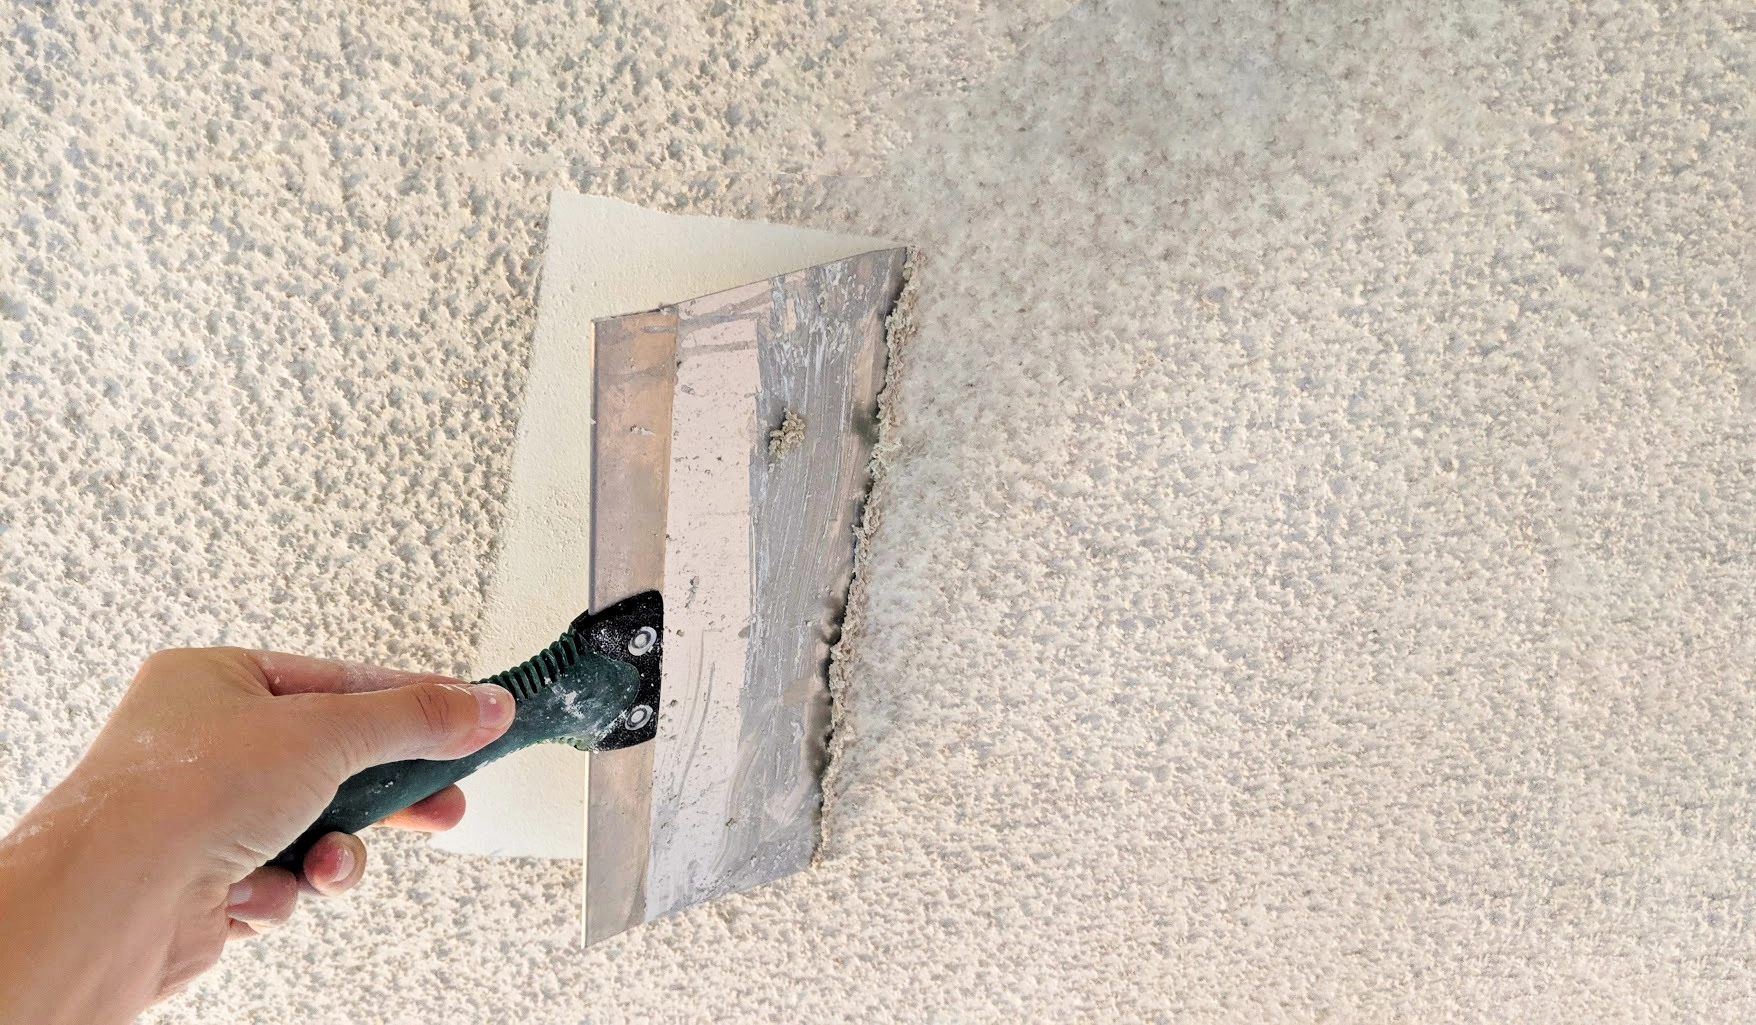 Close-up of someone using a paint scraper tool to remove white painted popcorn ceiling.